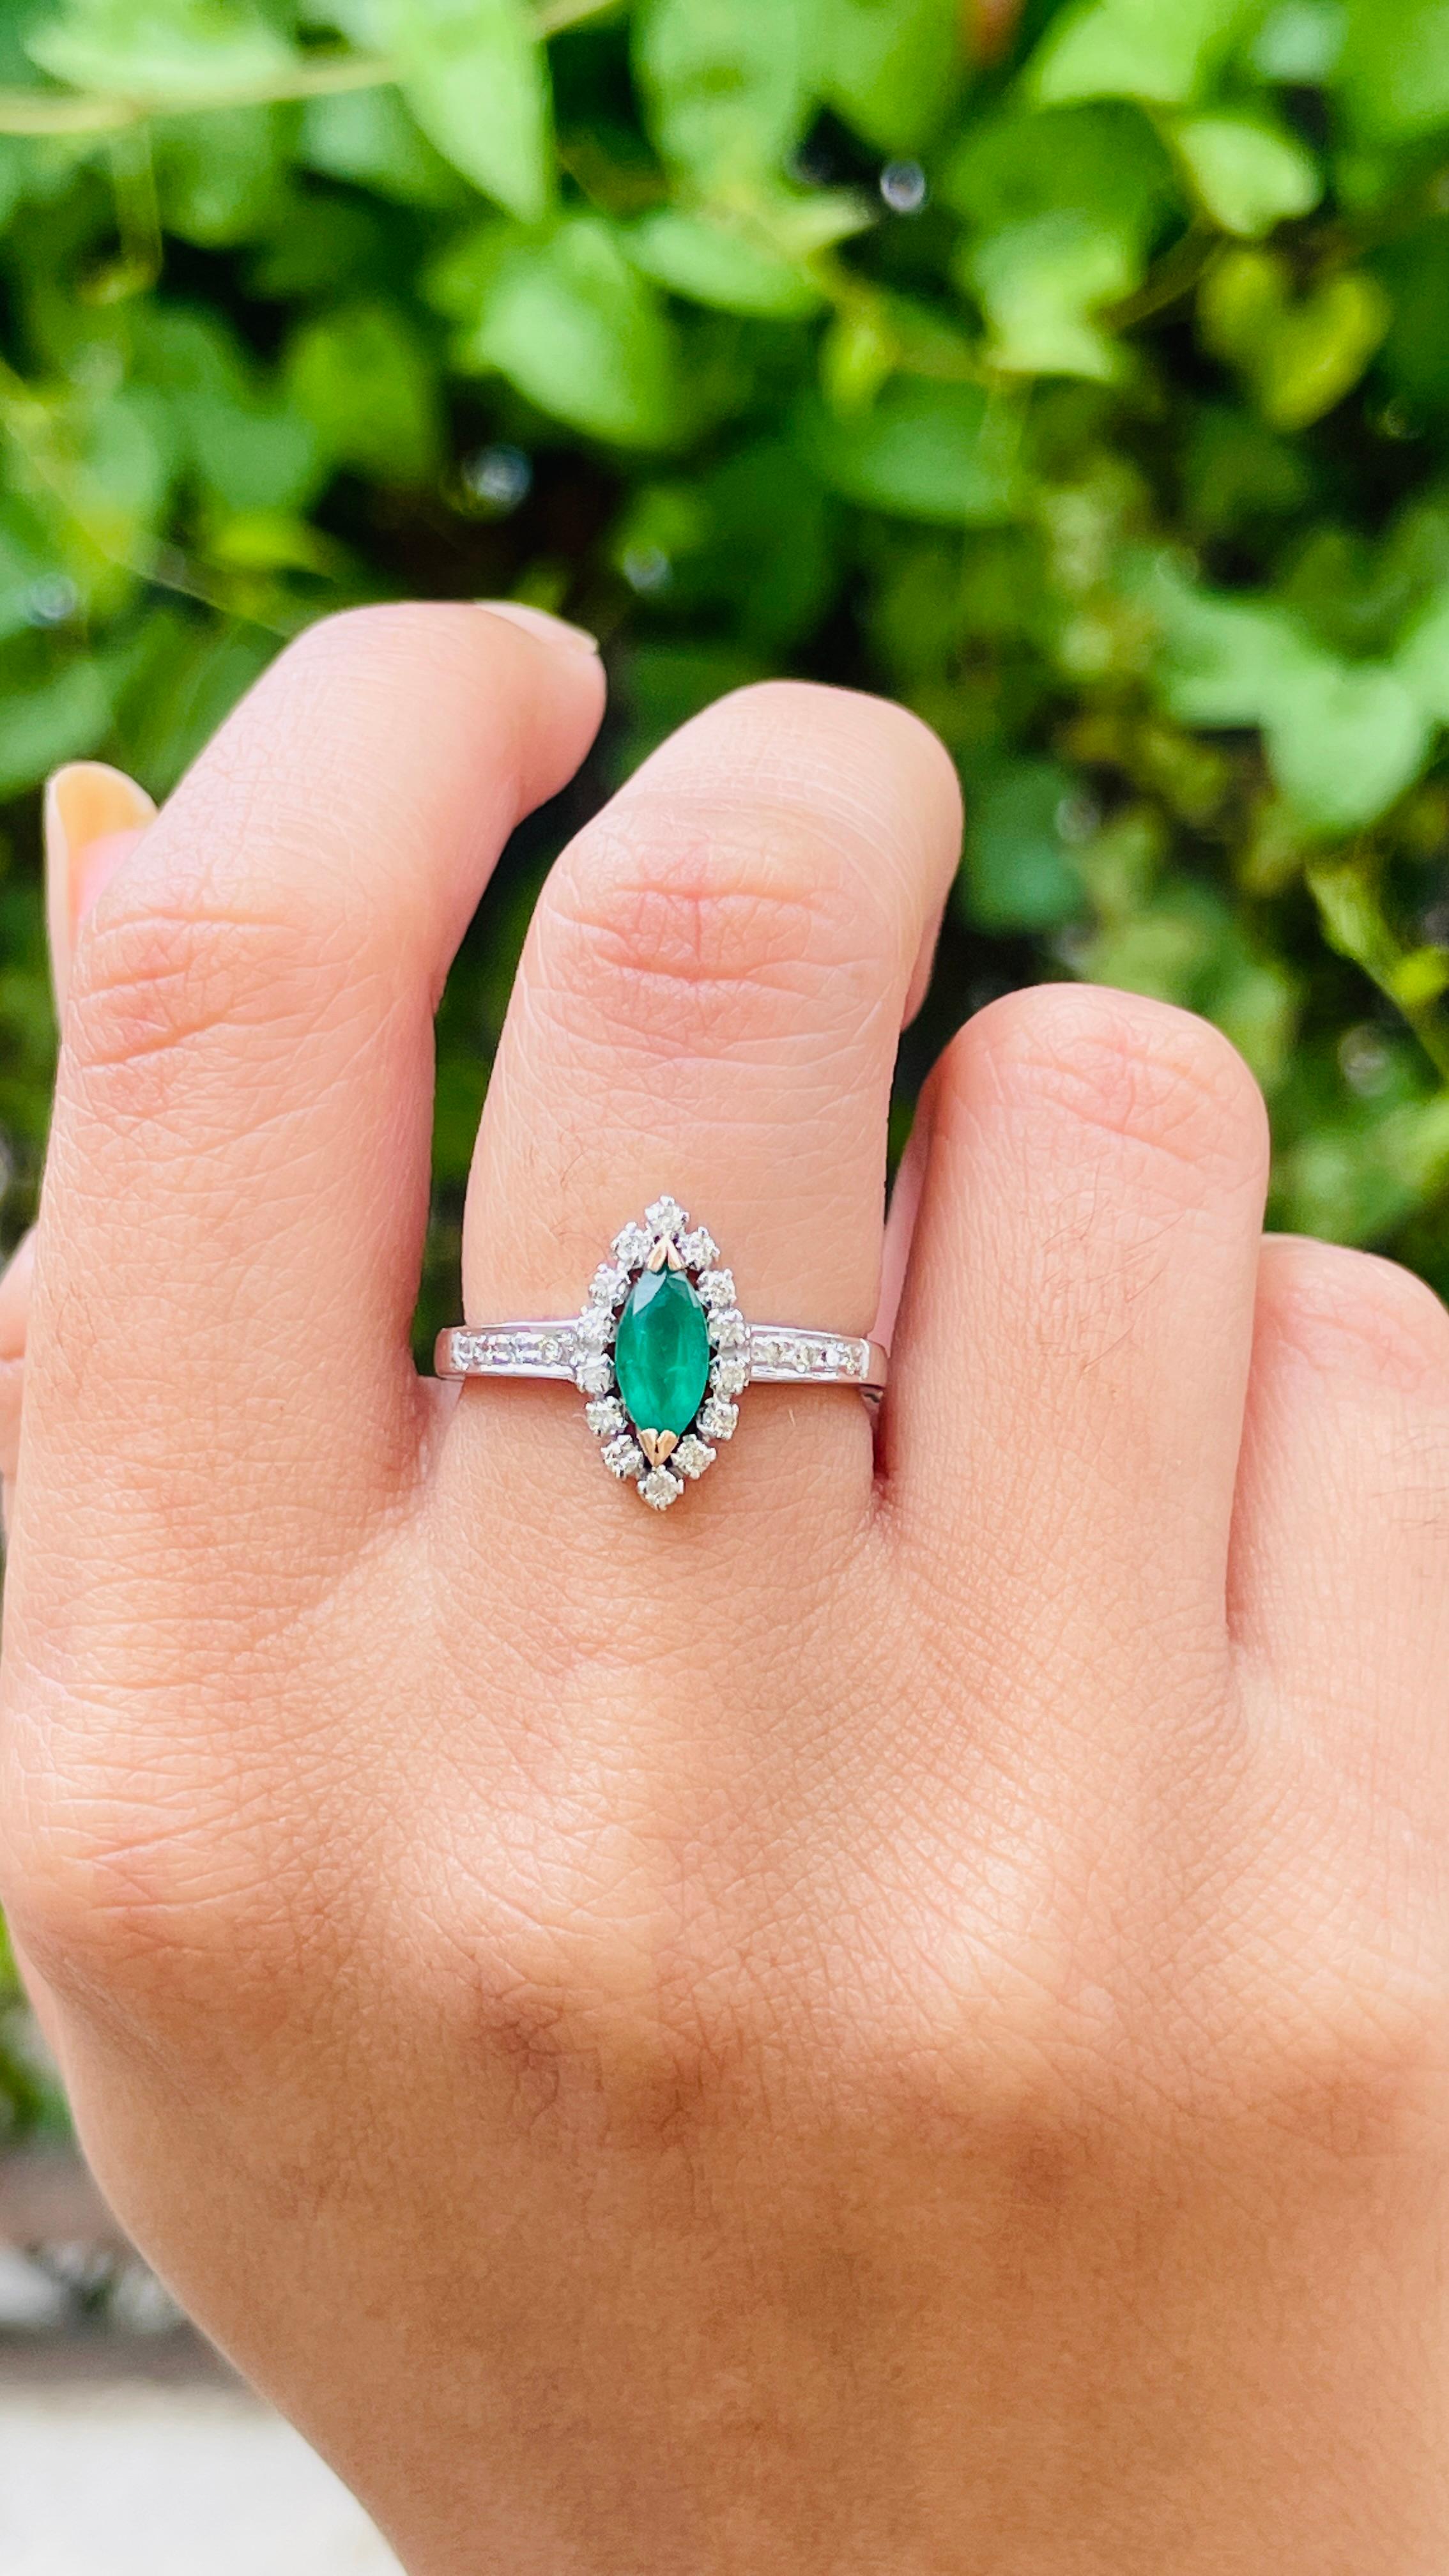 For Sale:  Marquise Shaped Emerald and Diamond Ring in 14K White Gold 8